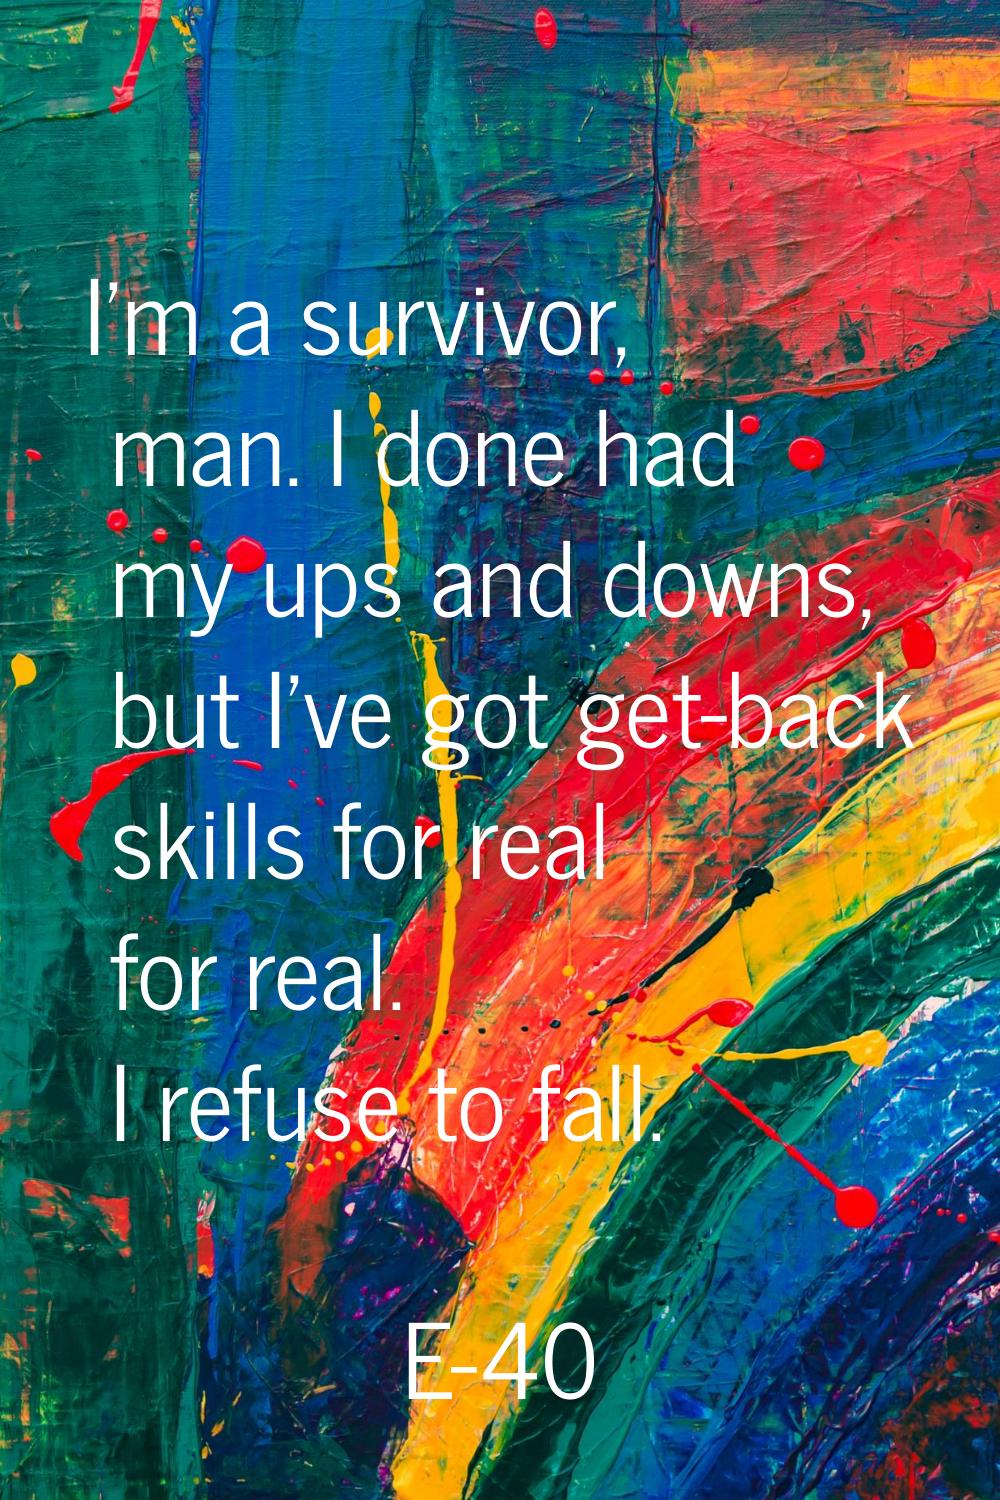 I'm a survivor, man. I done had my ups and downs, but I've got get-back skills for real for real. I